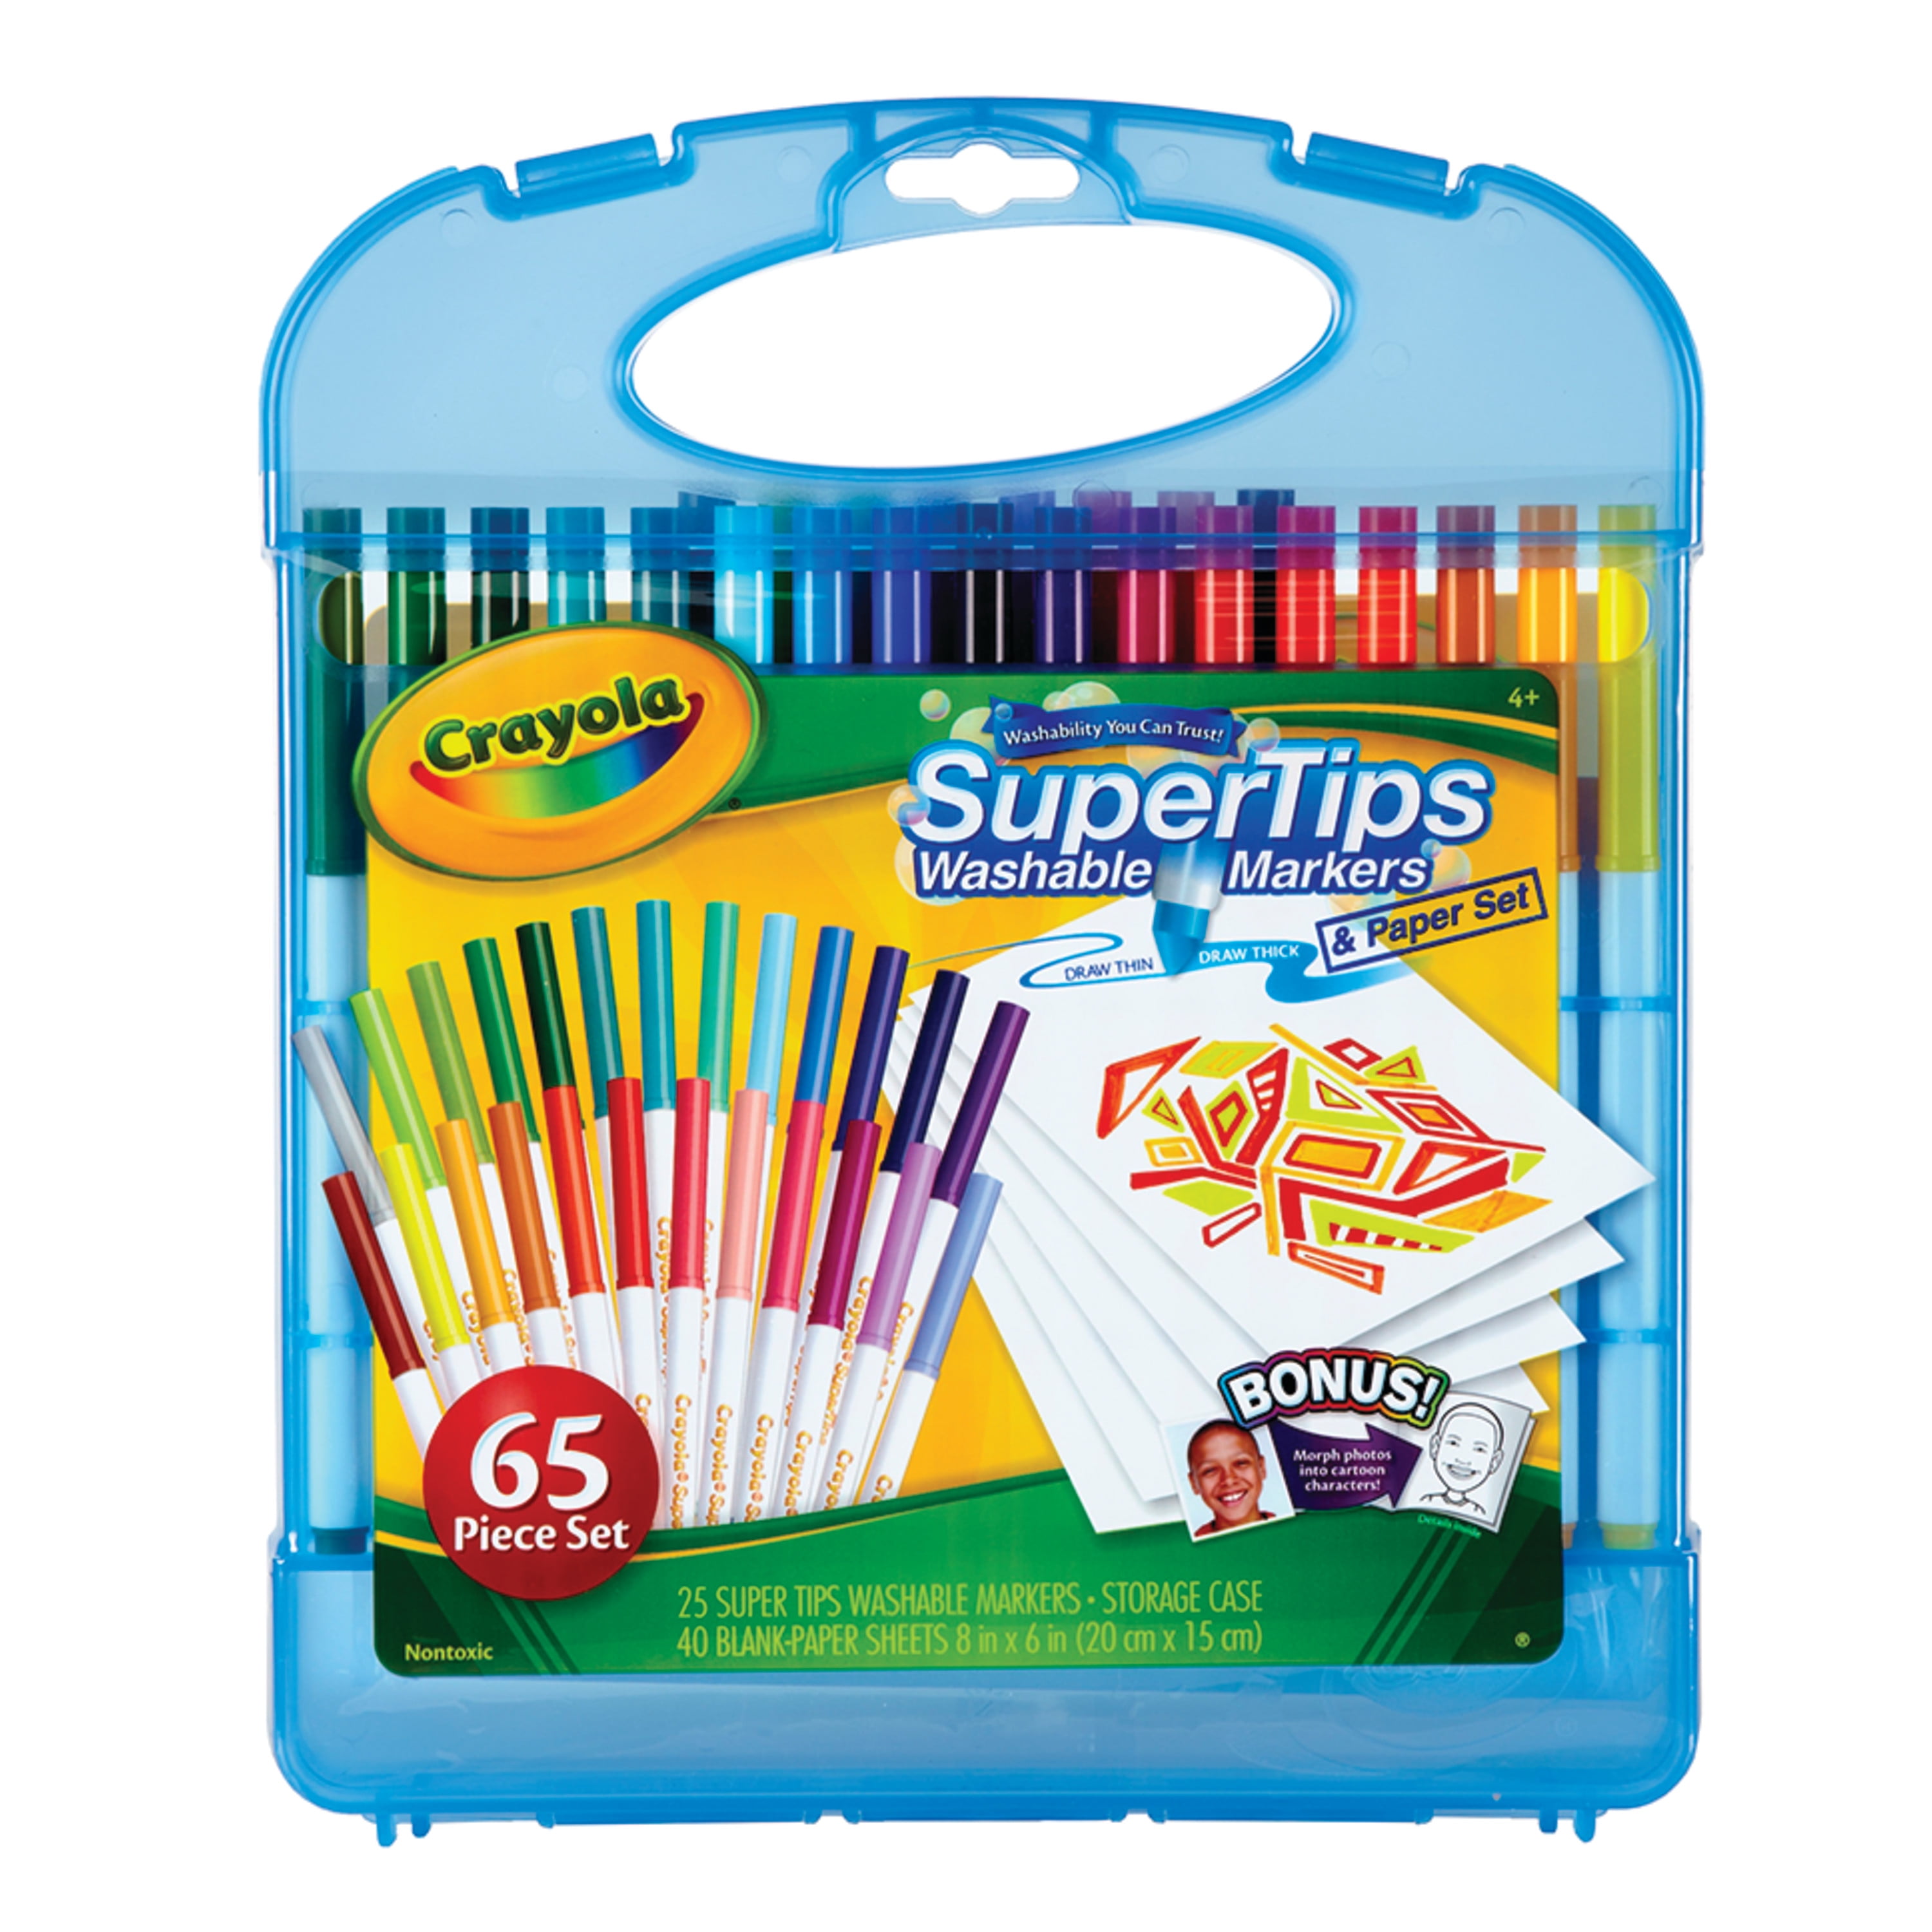 Crayola Pip-Squeaks Washable Markers and Paper Set, 65 pc - Foods Co.